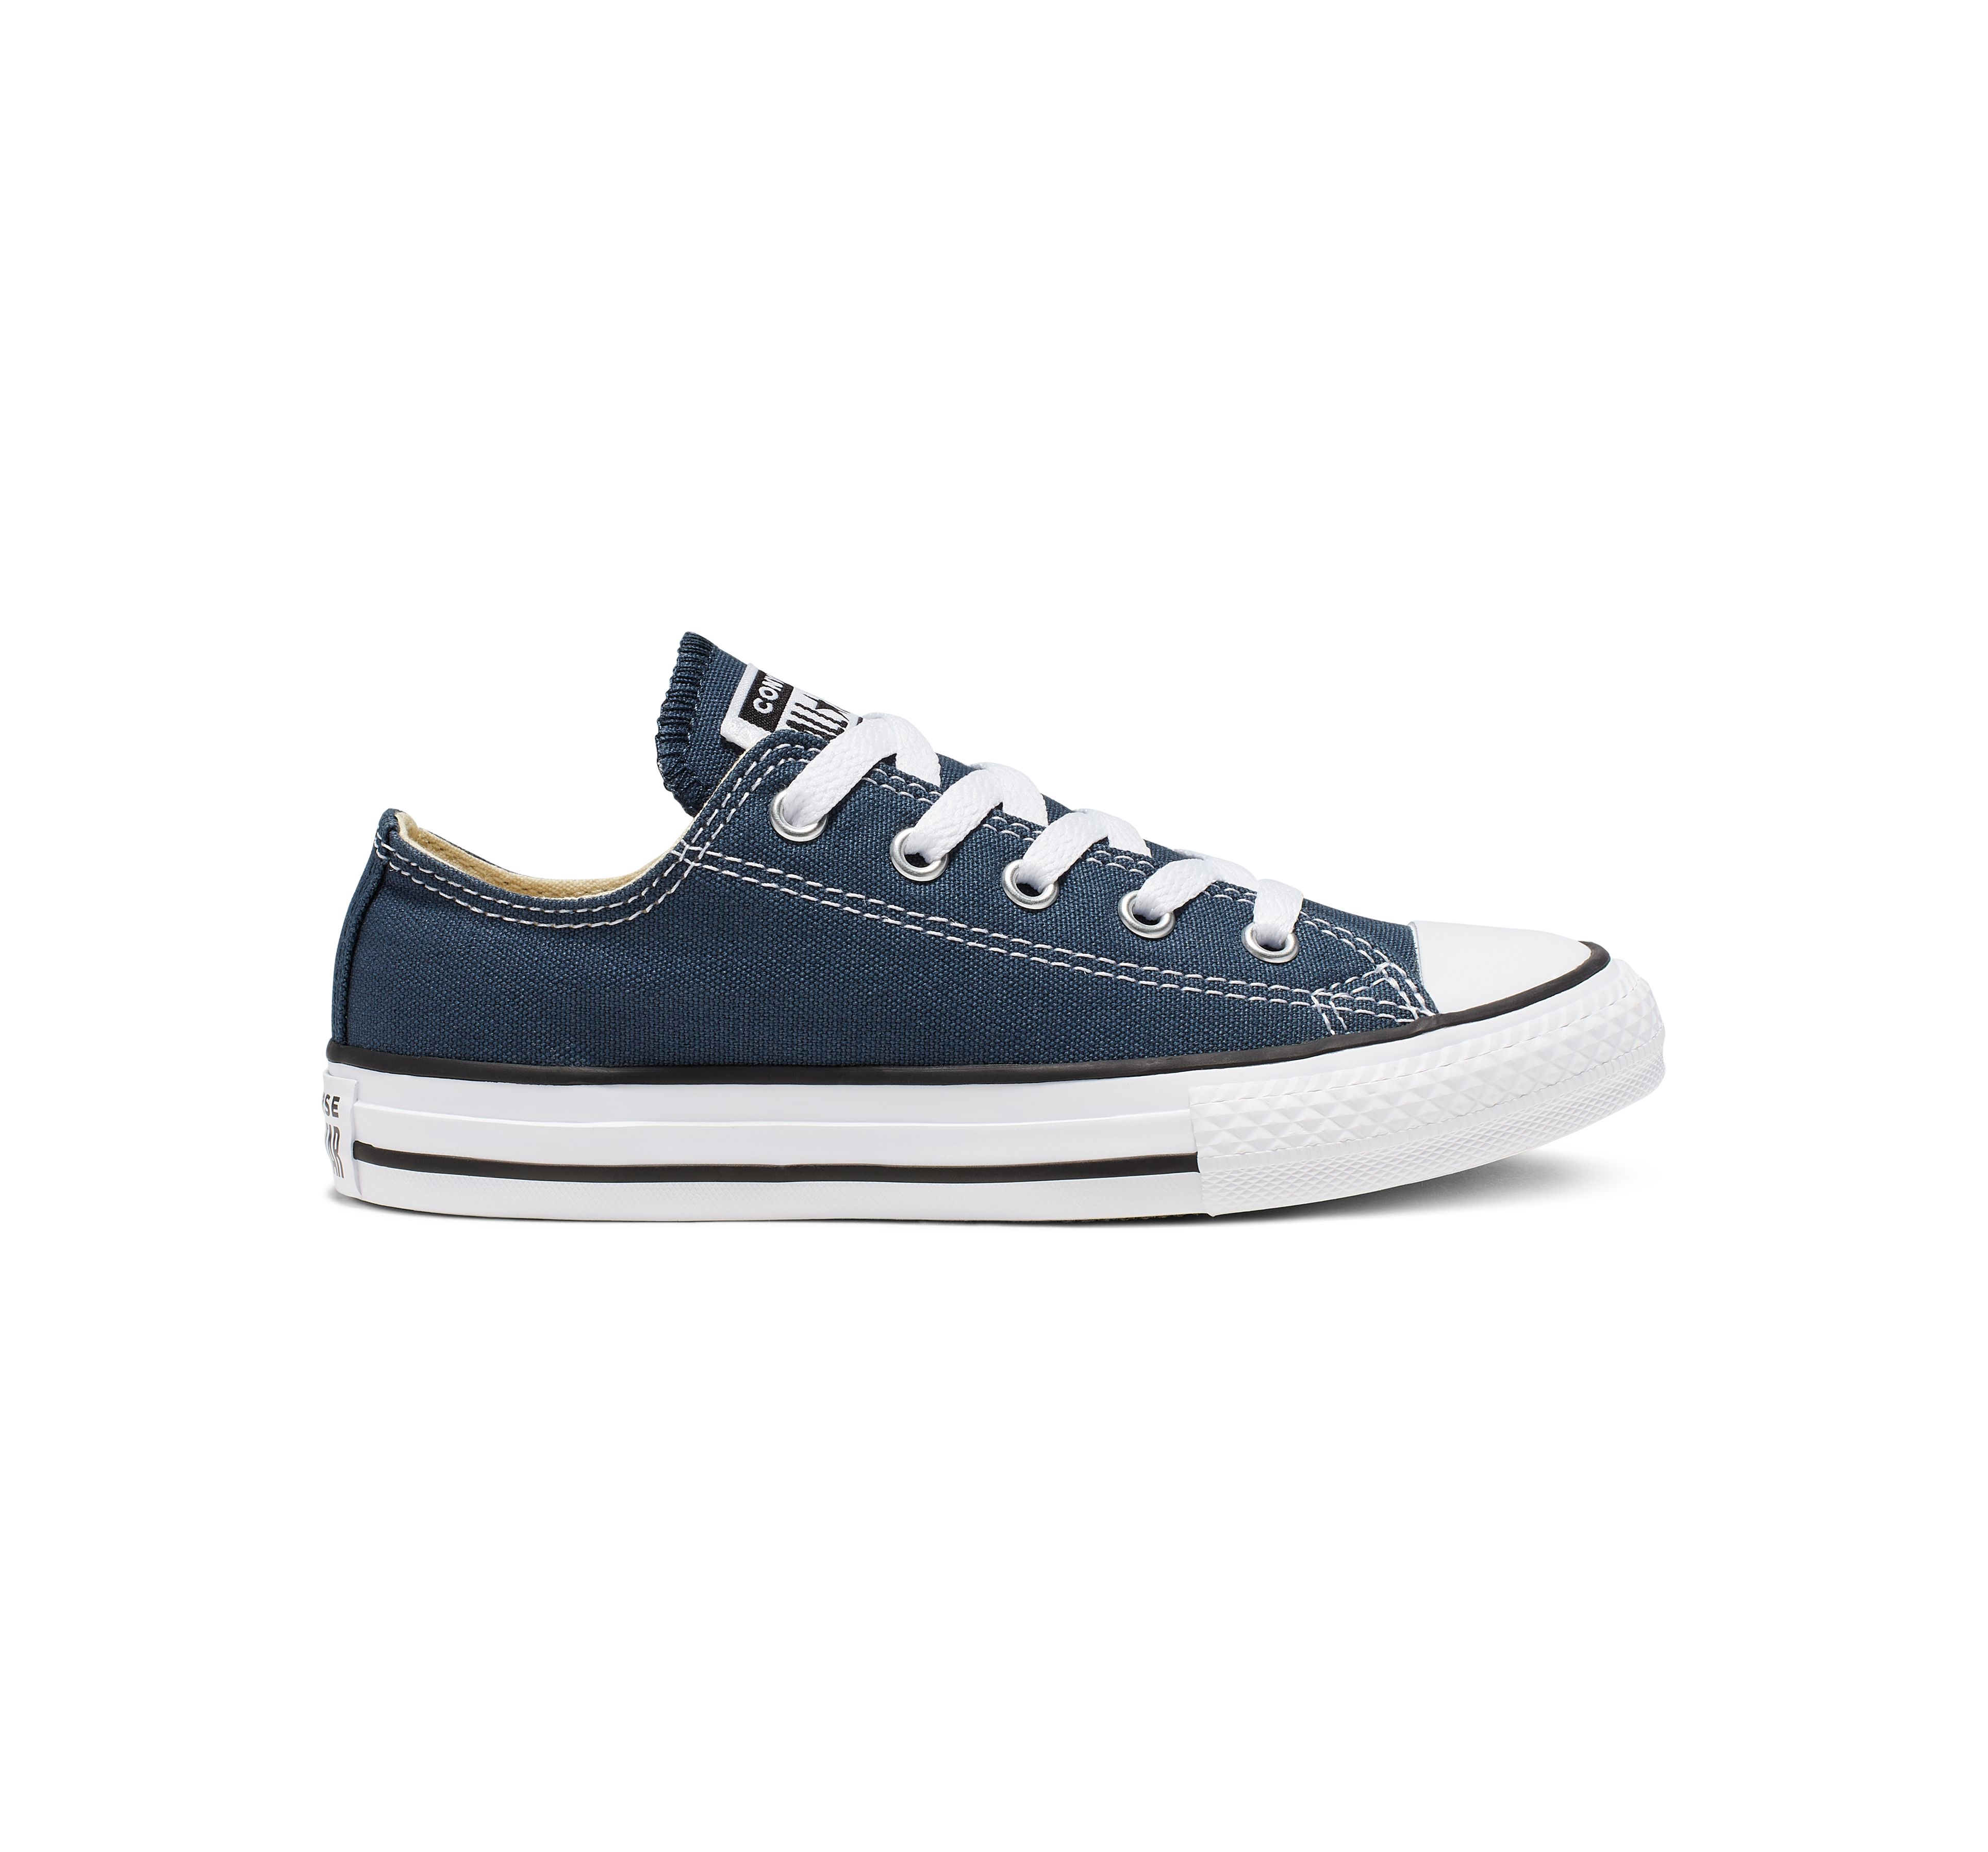 Converse - Buy Converse at Best Price 